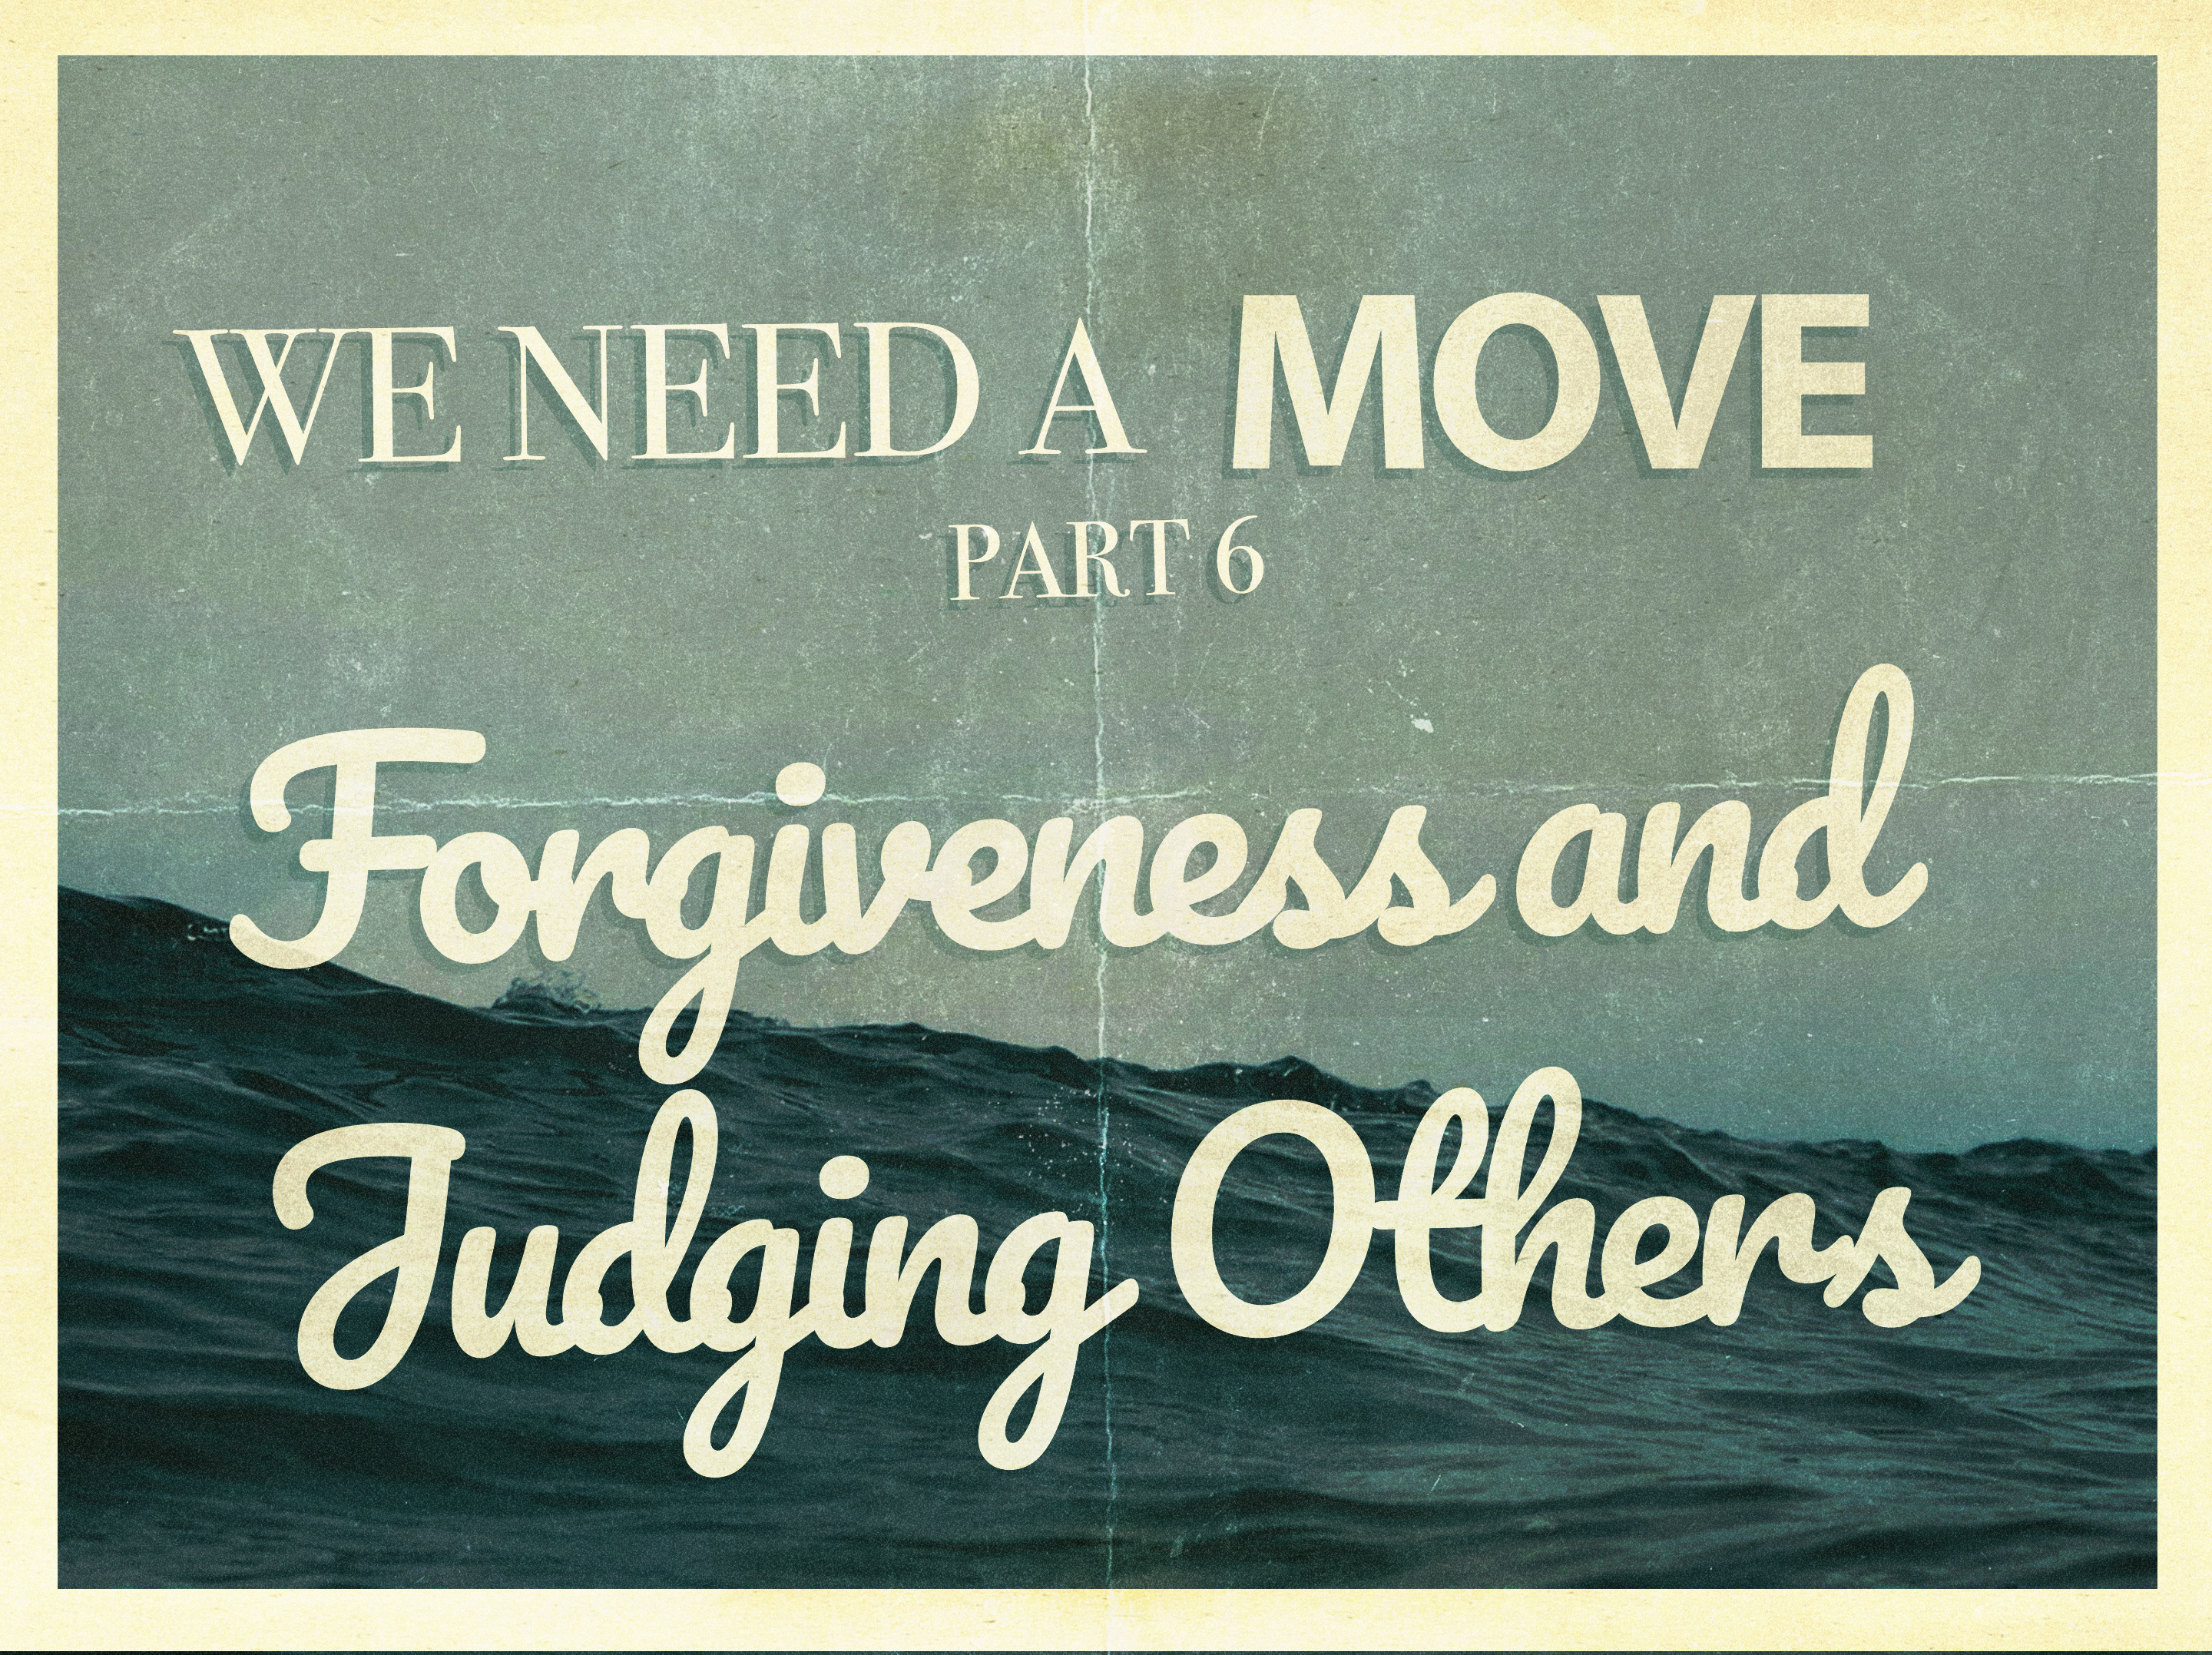 We Need A Move Part 6: Forgiveness and Judging Others